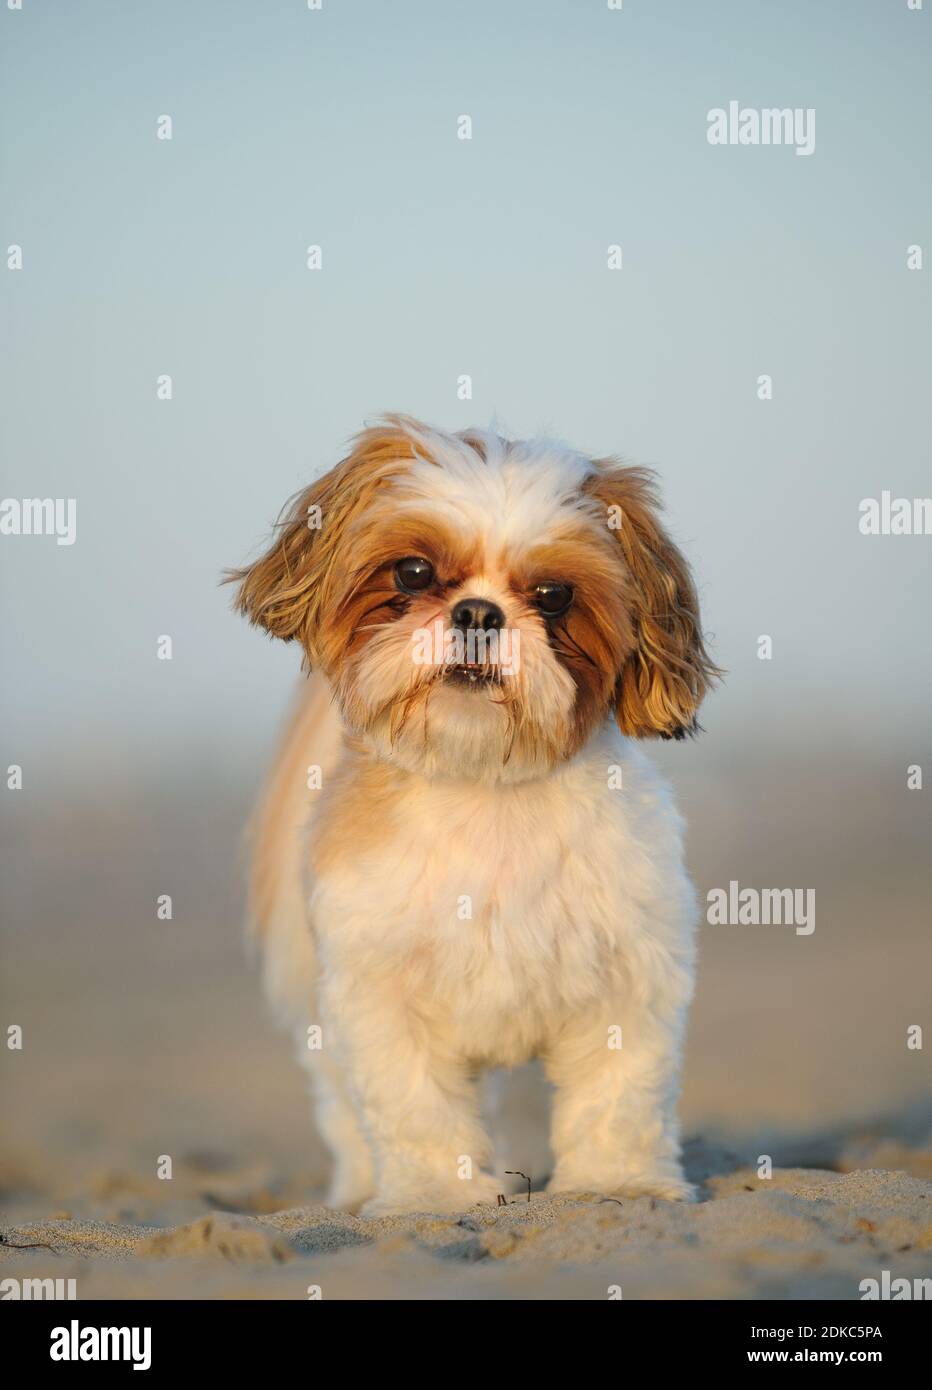 Portrait Of Puppy On Sand At Beach Against Sky Stock Photo